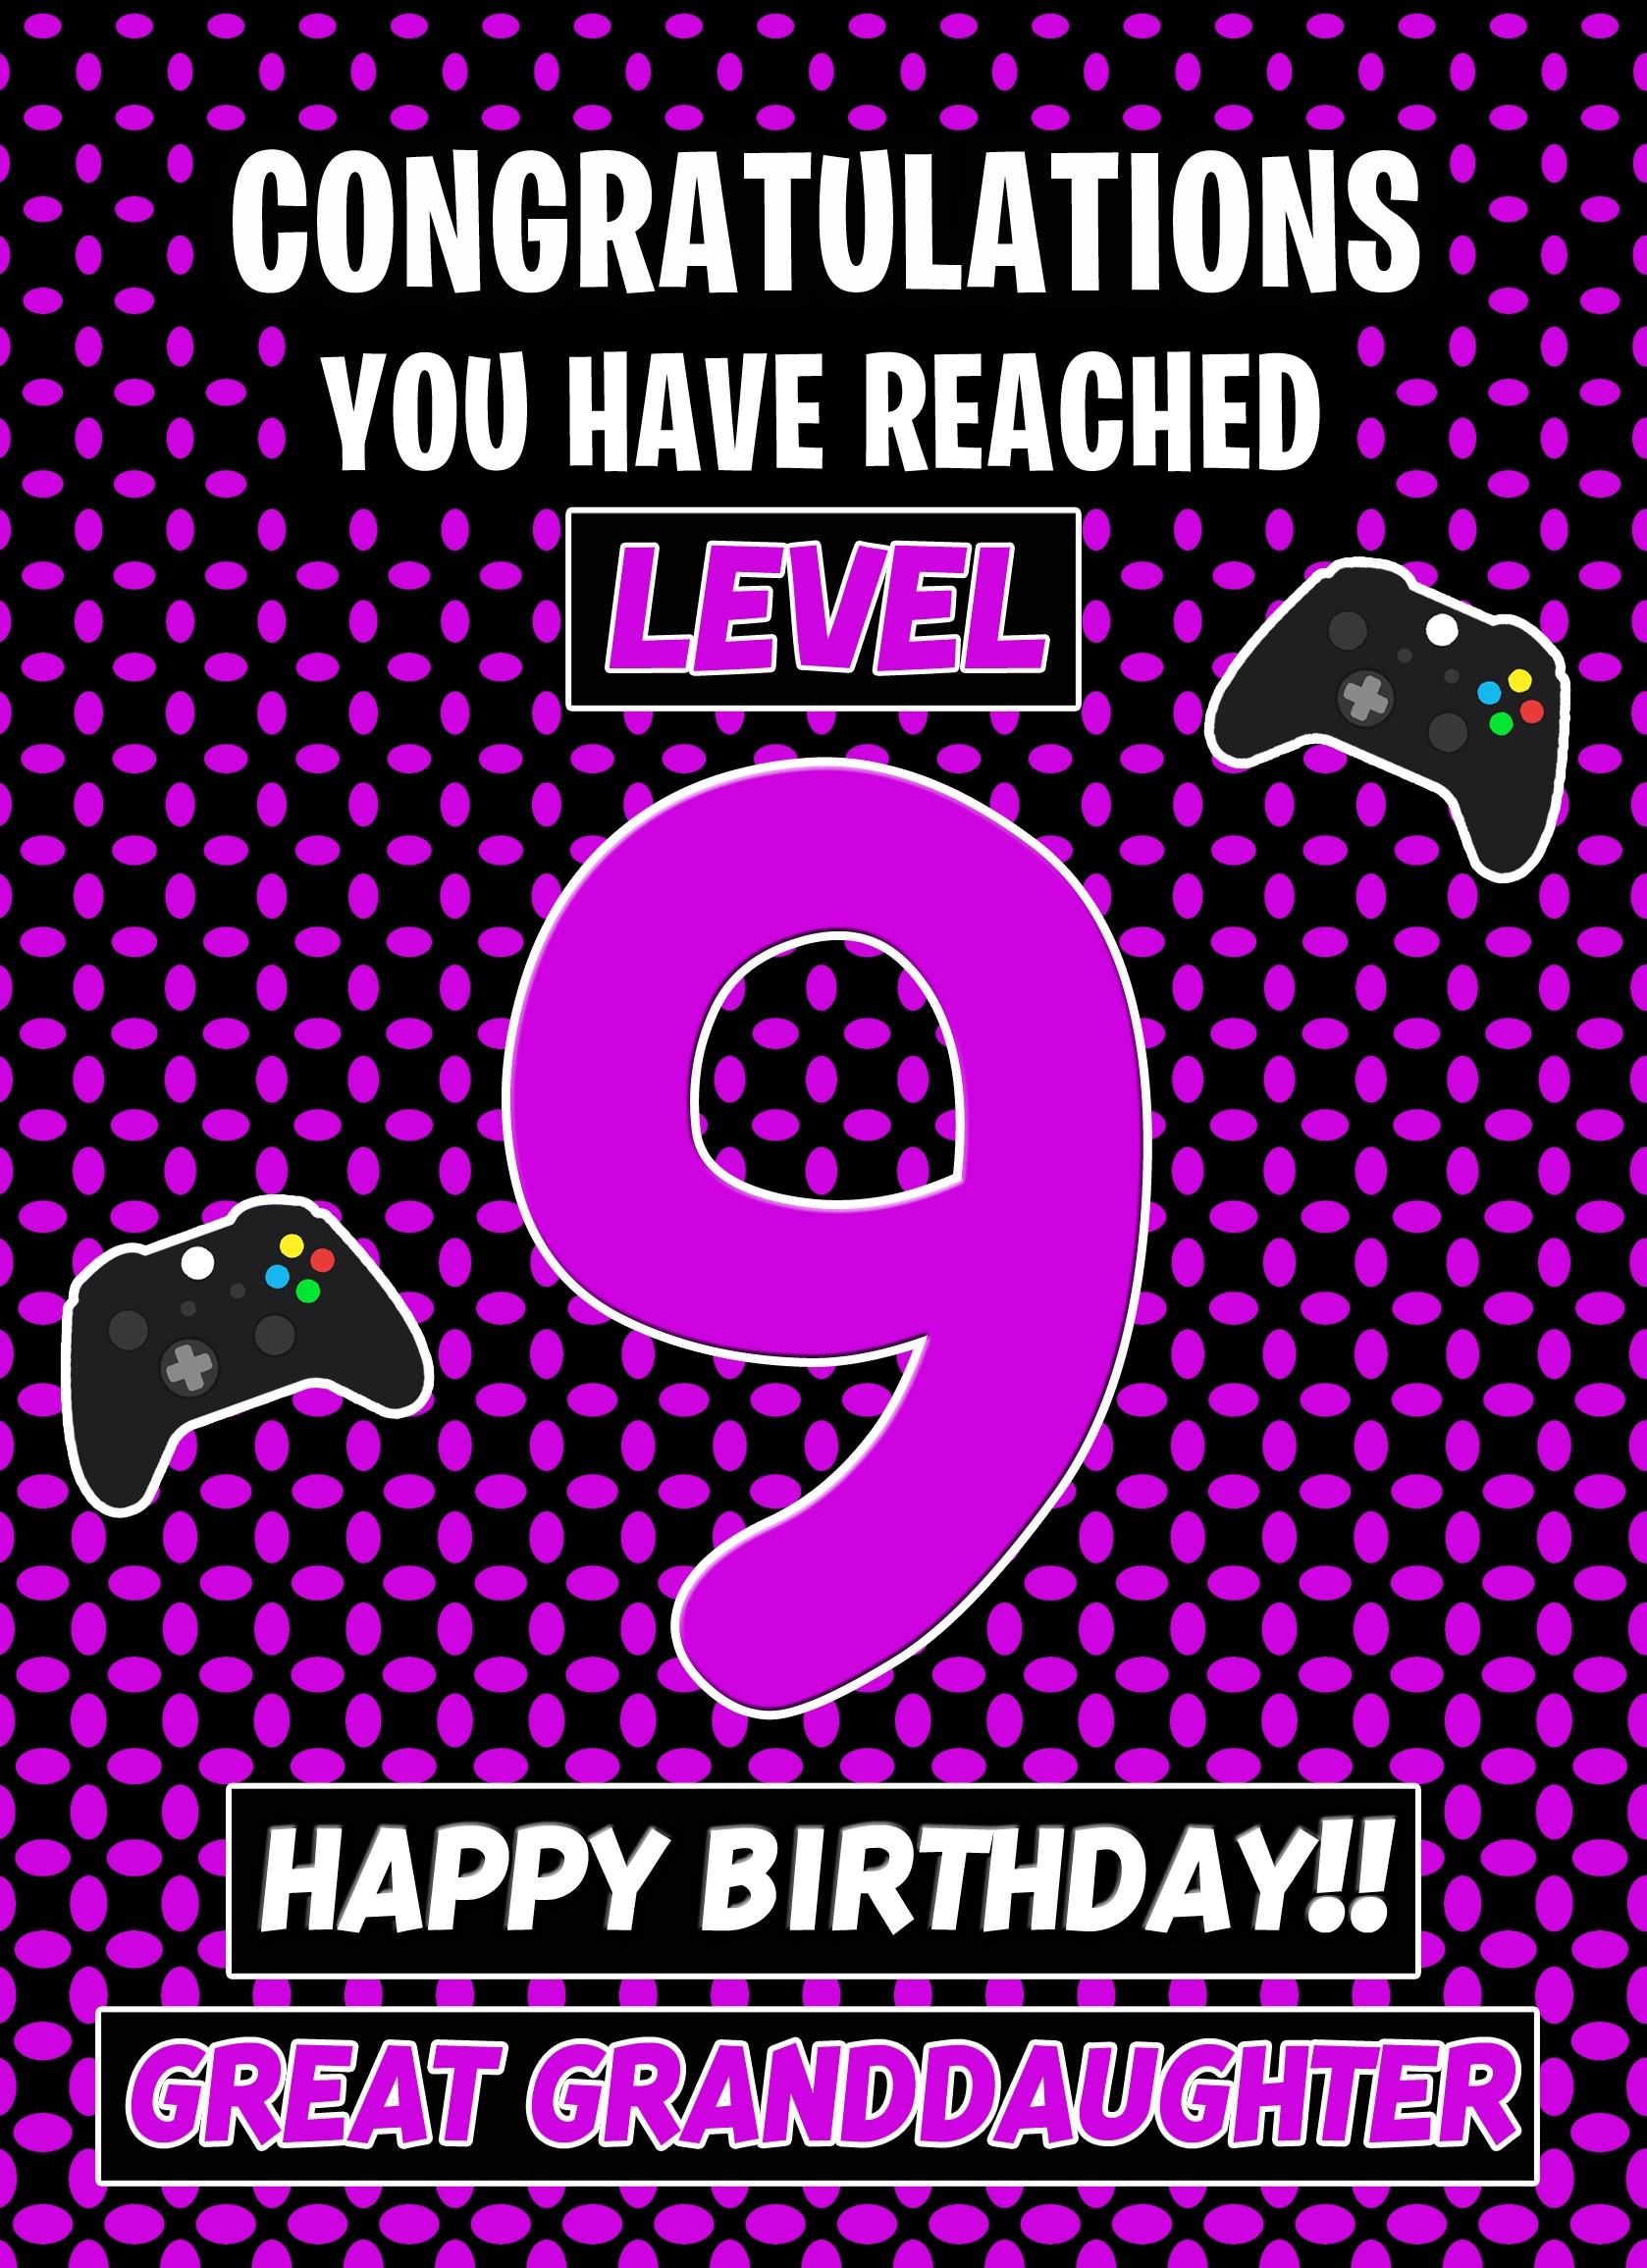 Great Granddaughter 9th Birthday Card (Level Up Gamer)